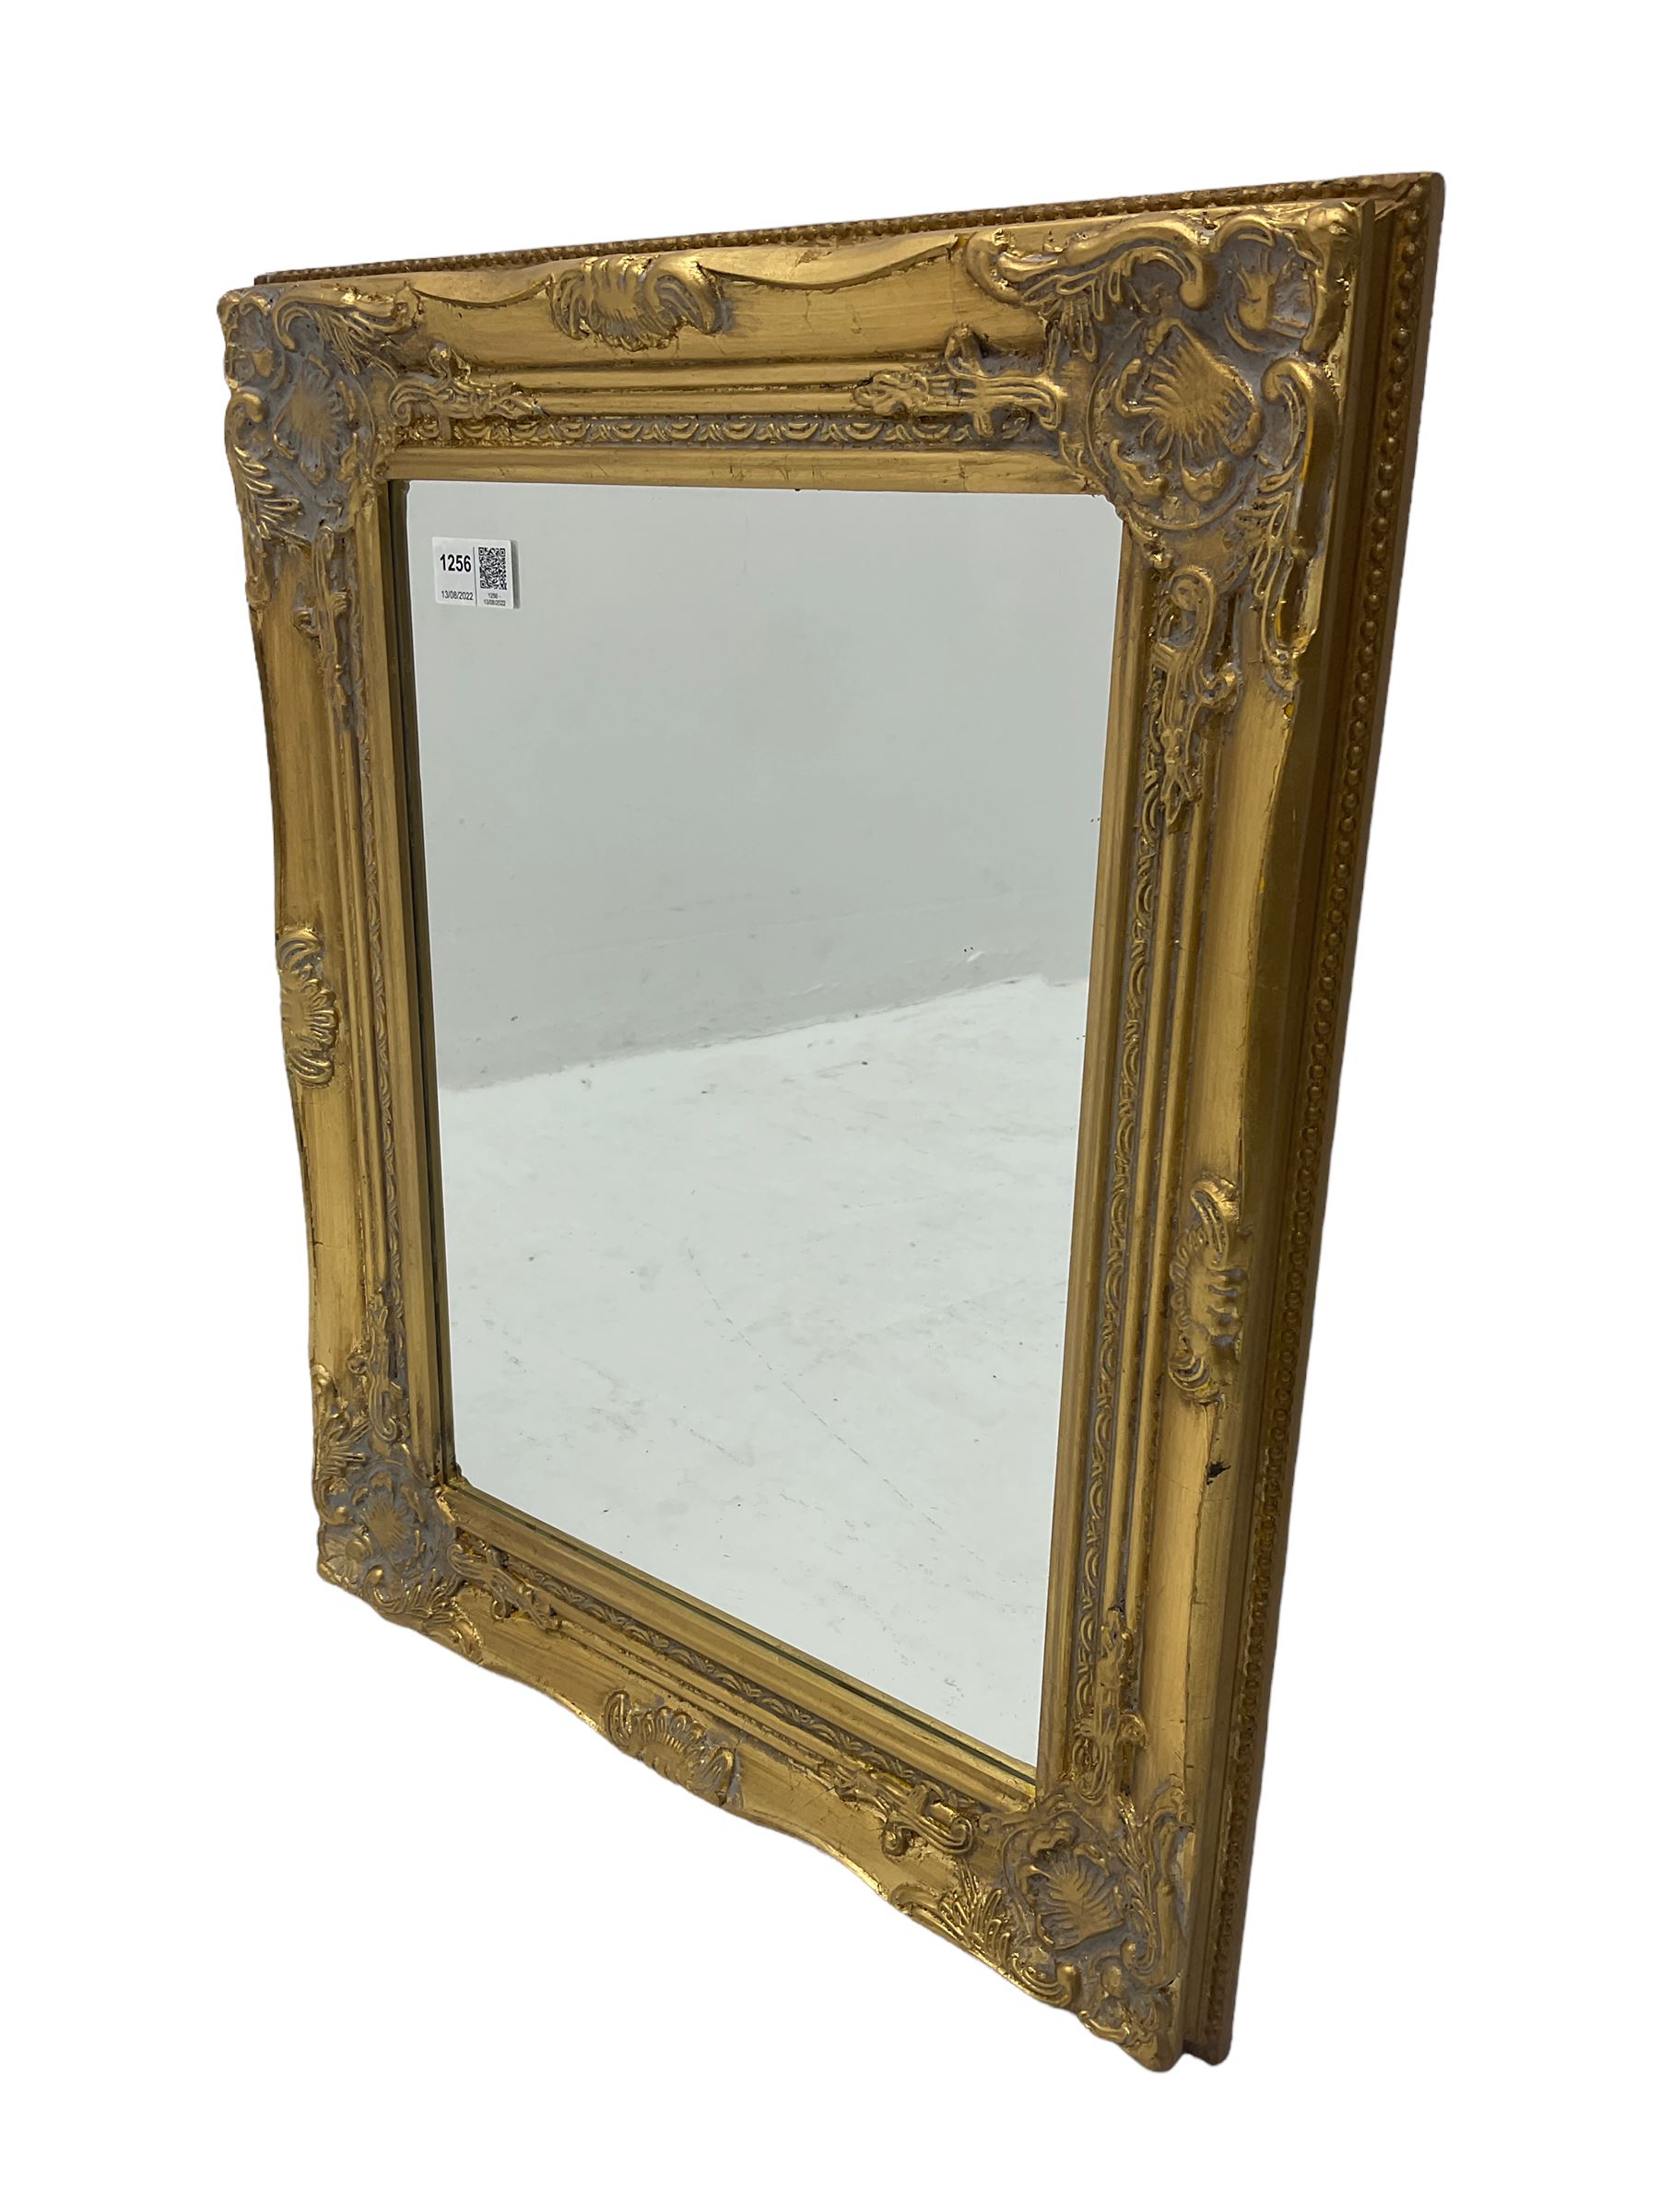 Pair of small gold finish classical wall mirrors - Image 2 of 4